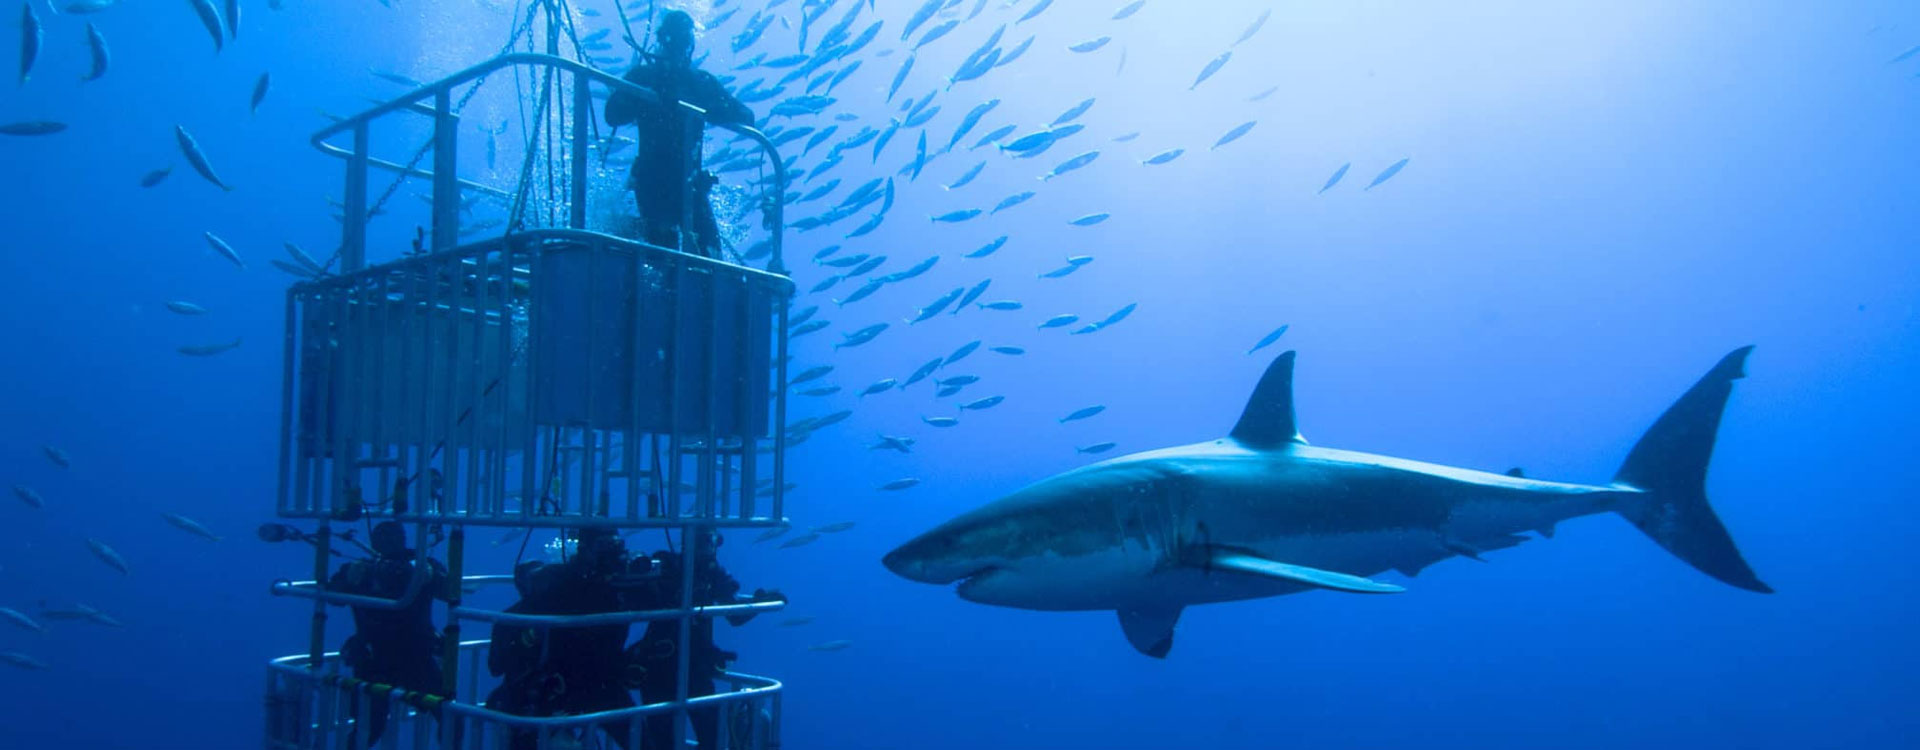 Full Day Shark Cage Diving